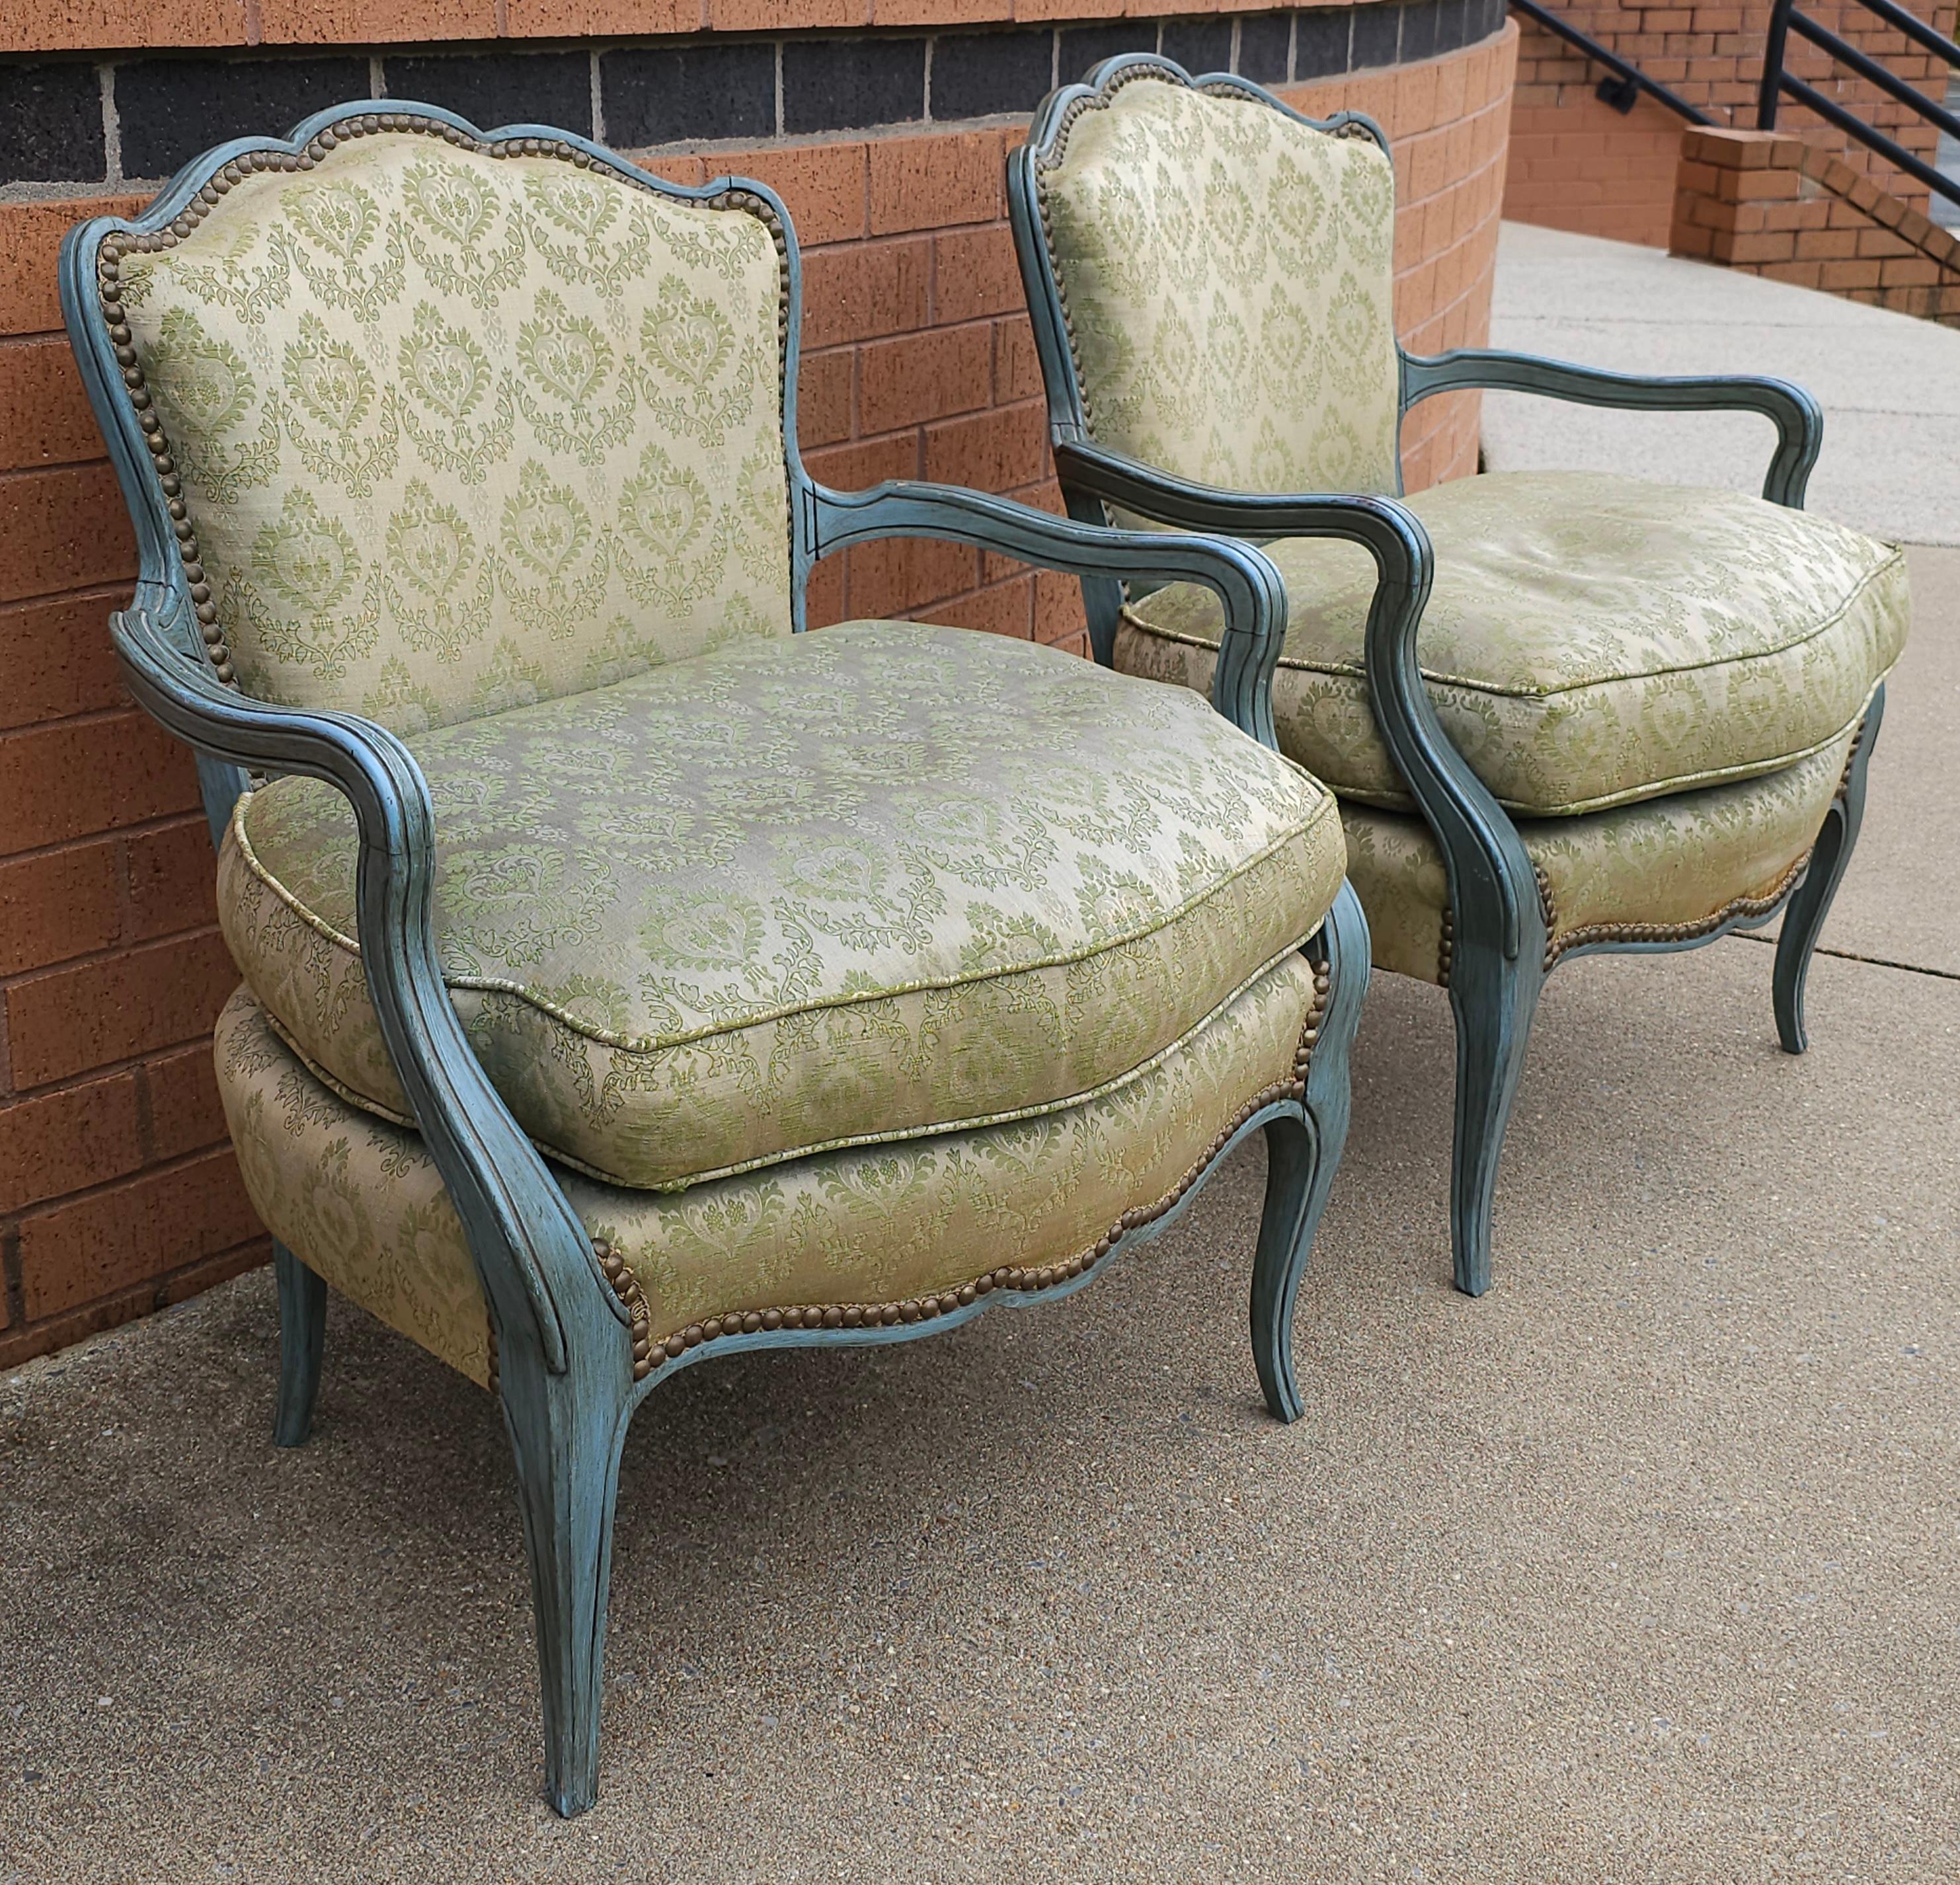 Pair French Provincial Green Painted And Upholstered Low Fauteuils / Bergeres In Good Condition For Sale In Germantown, MD